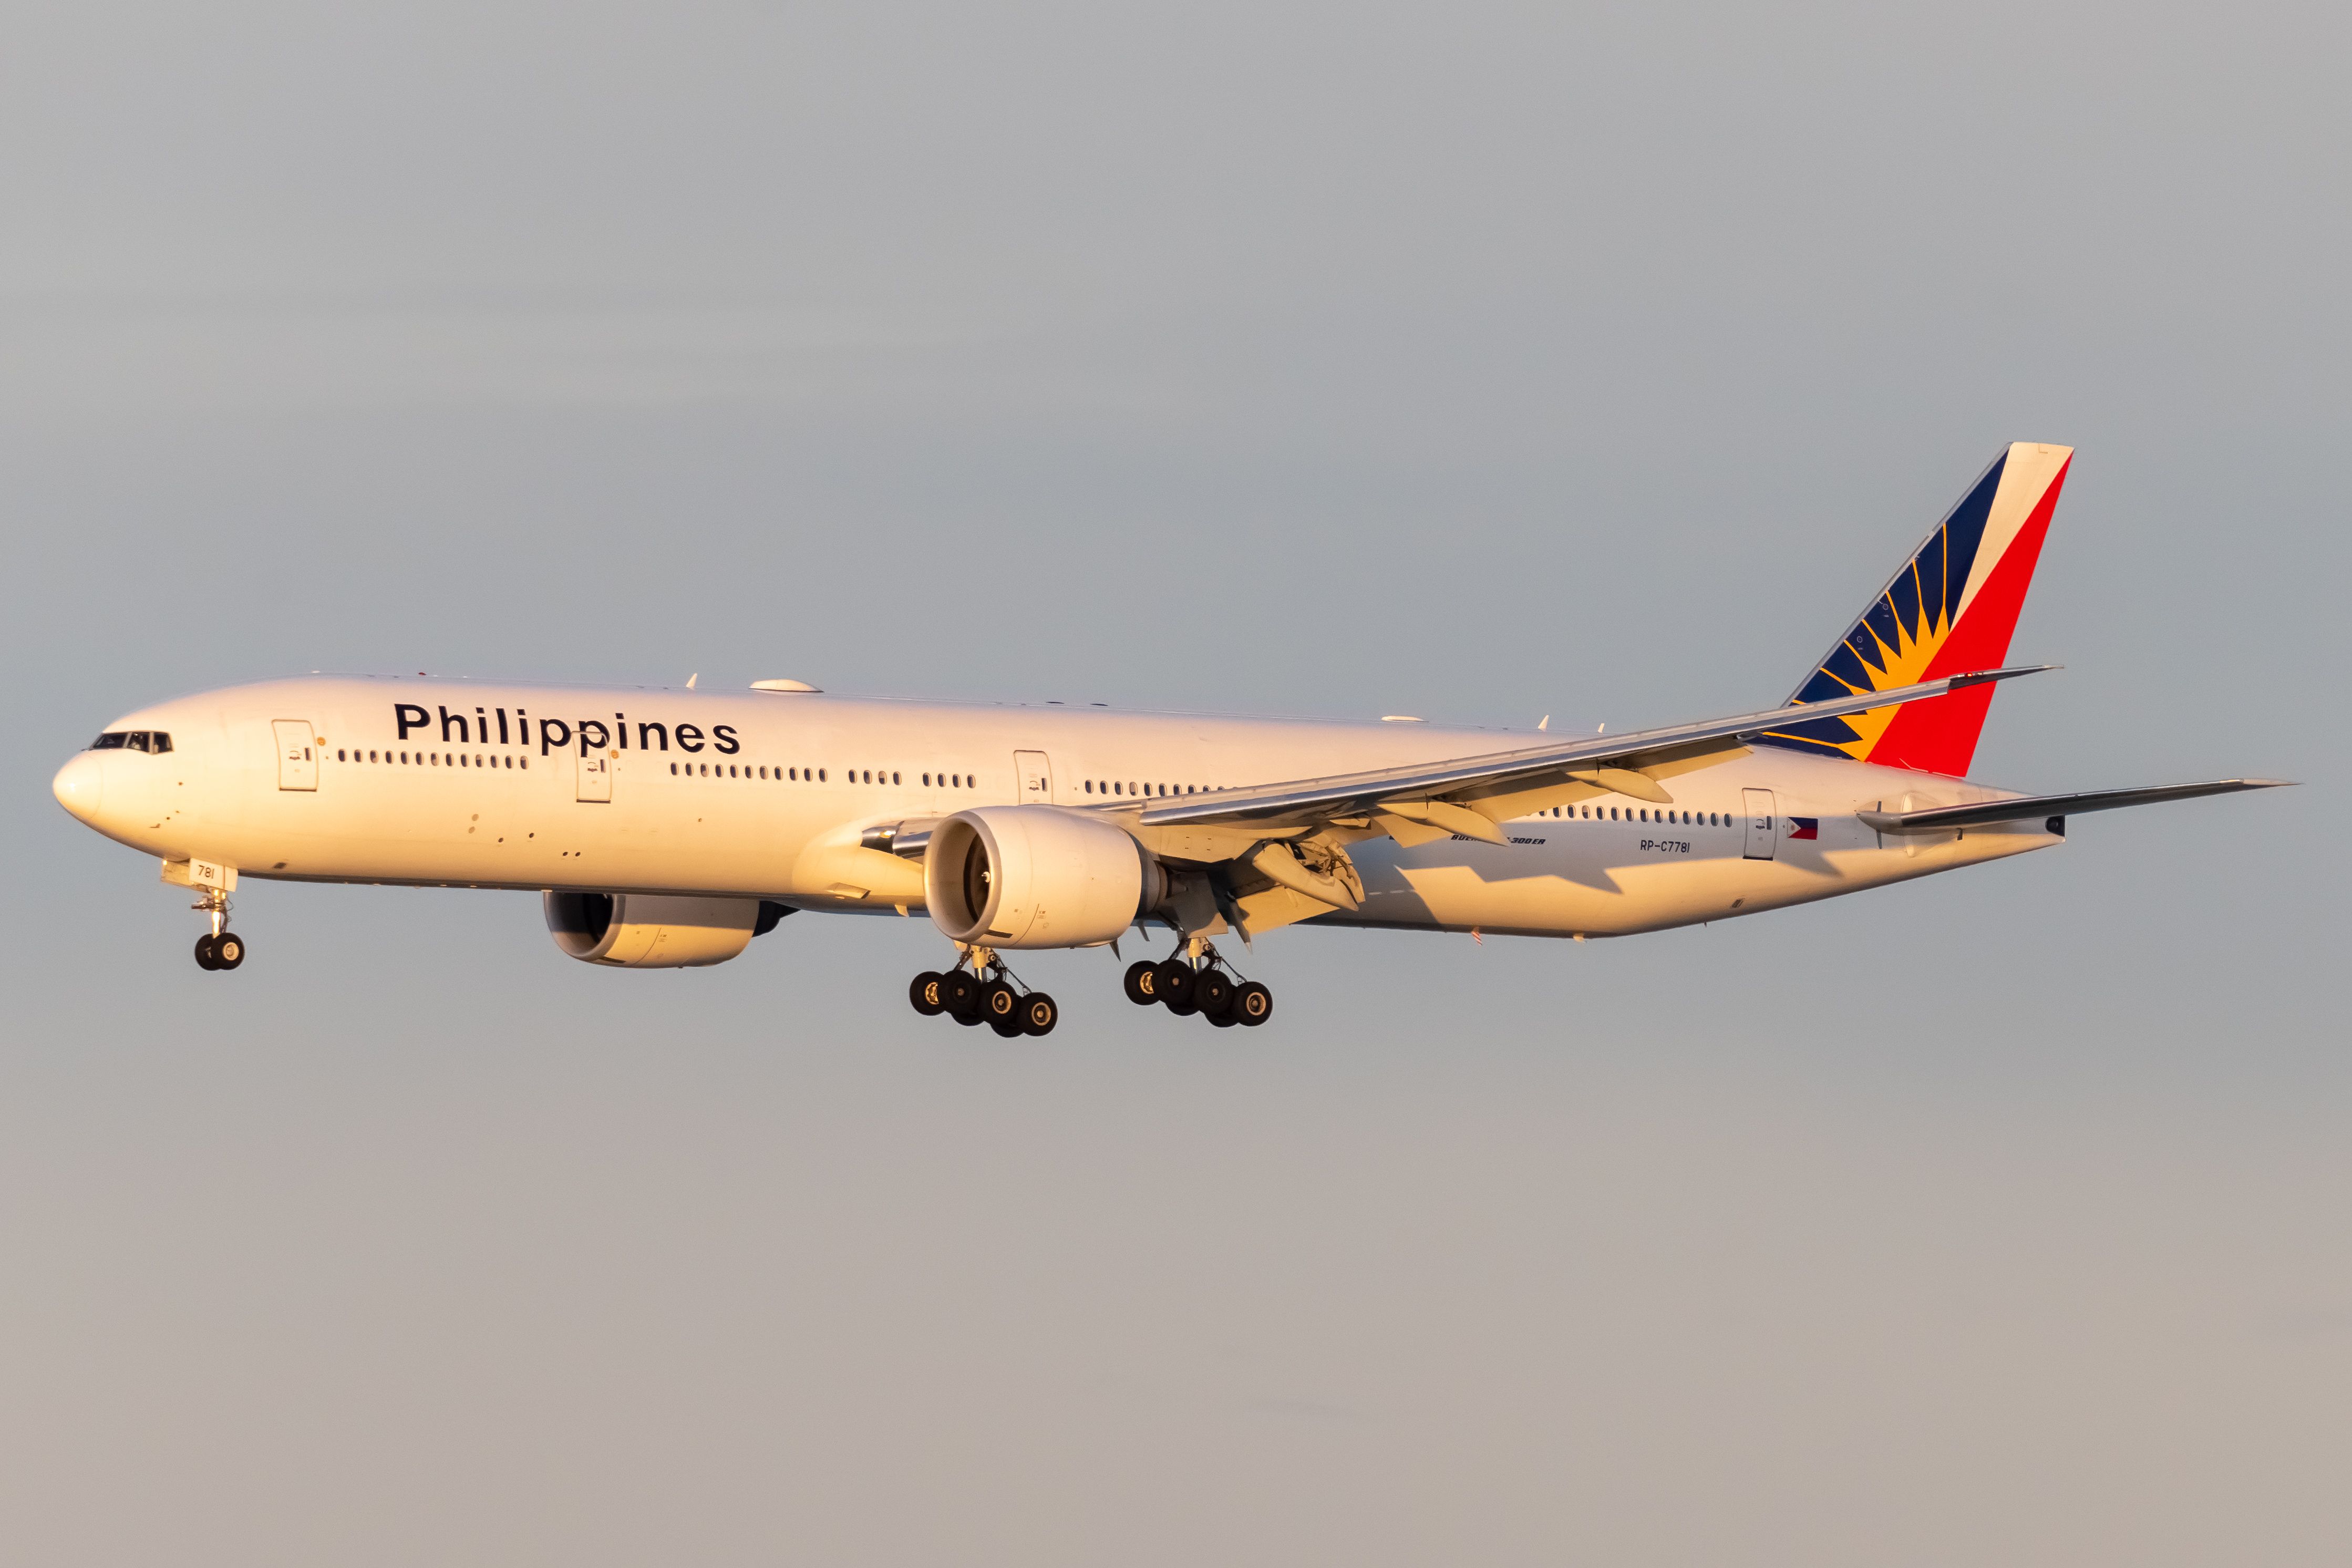 Philippine Airlines Boeing 777 flying